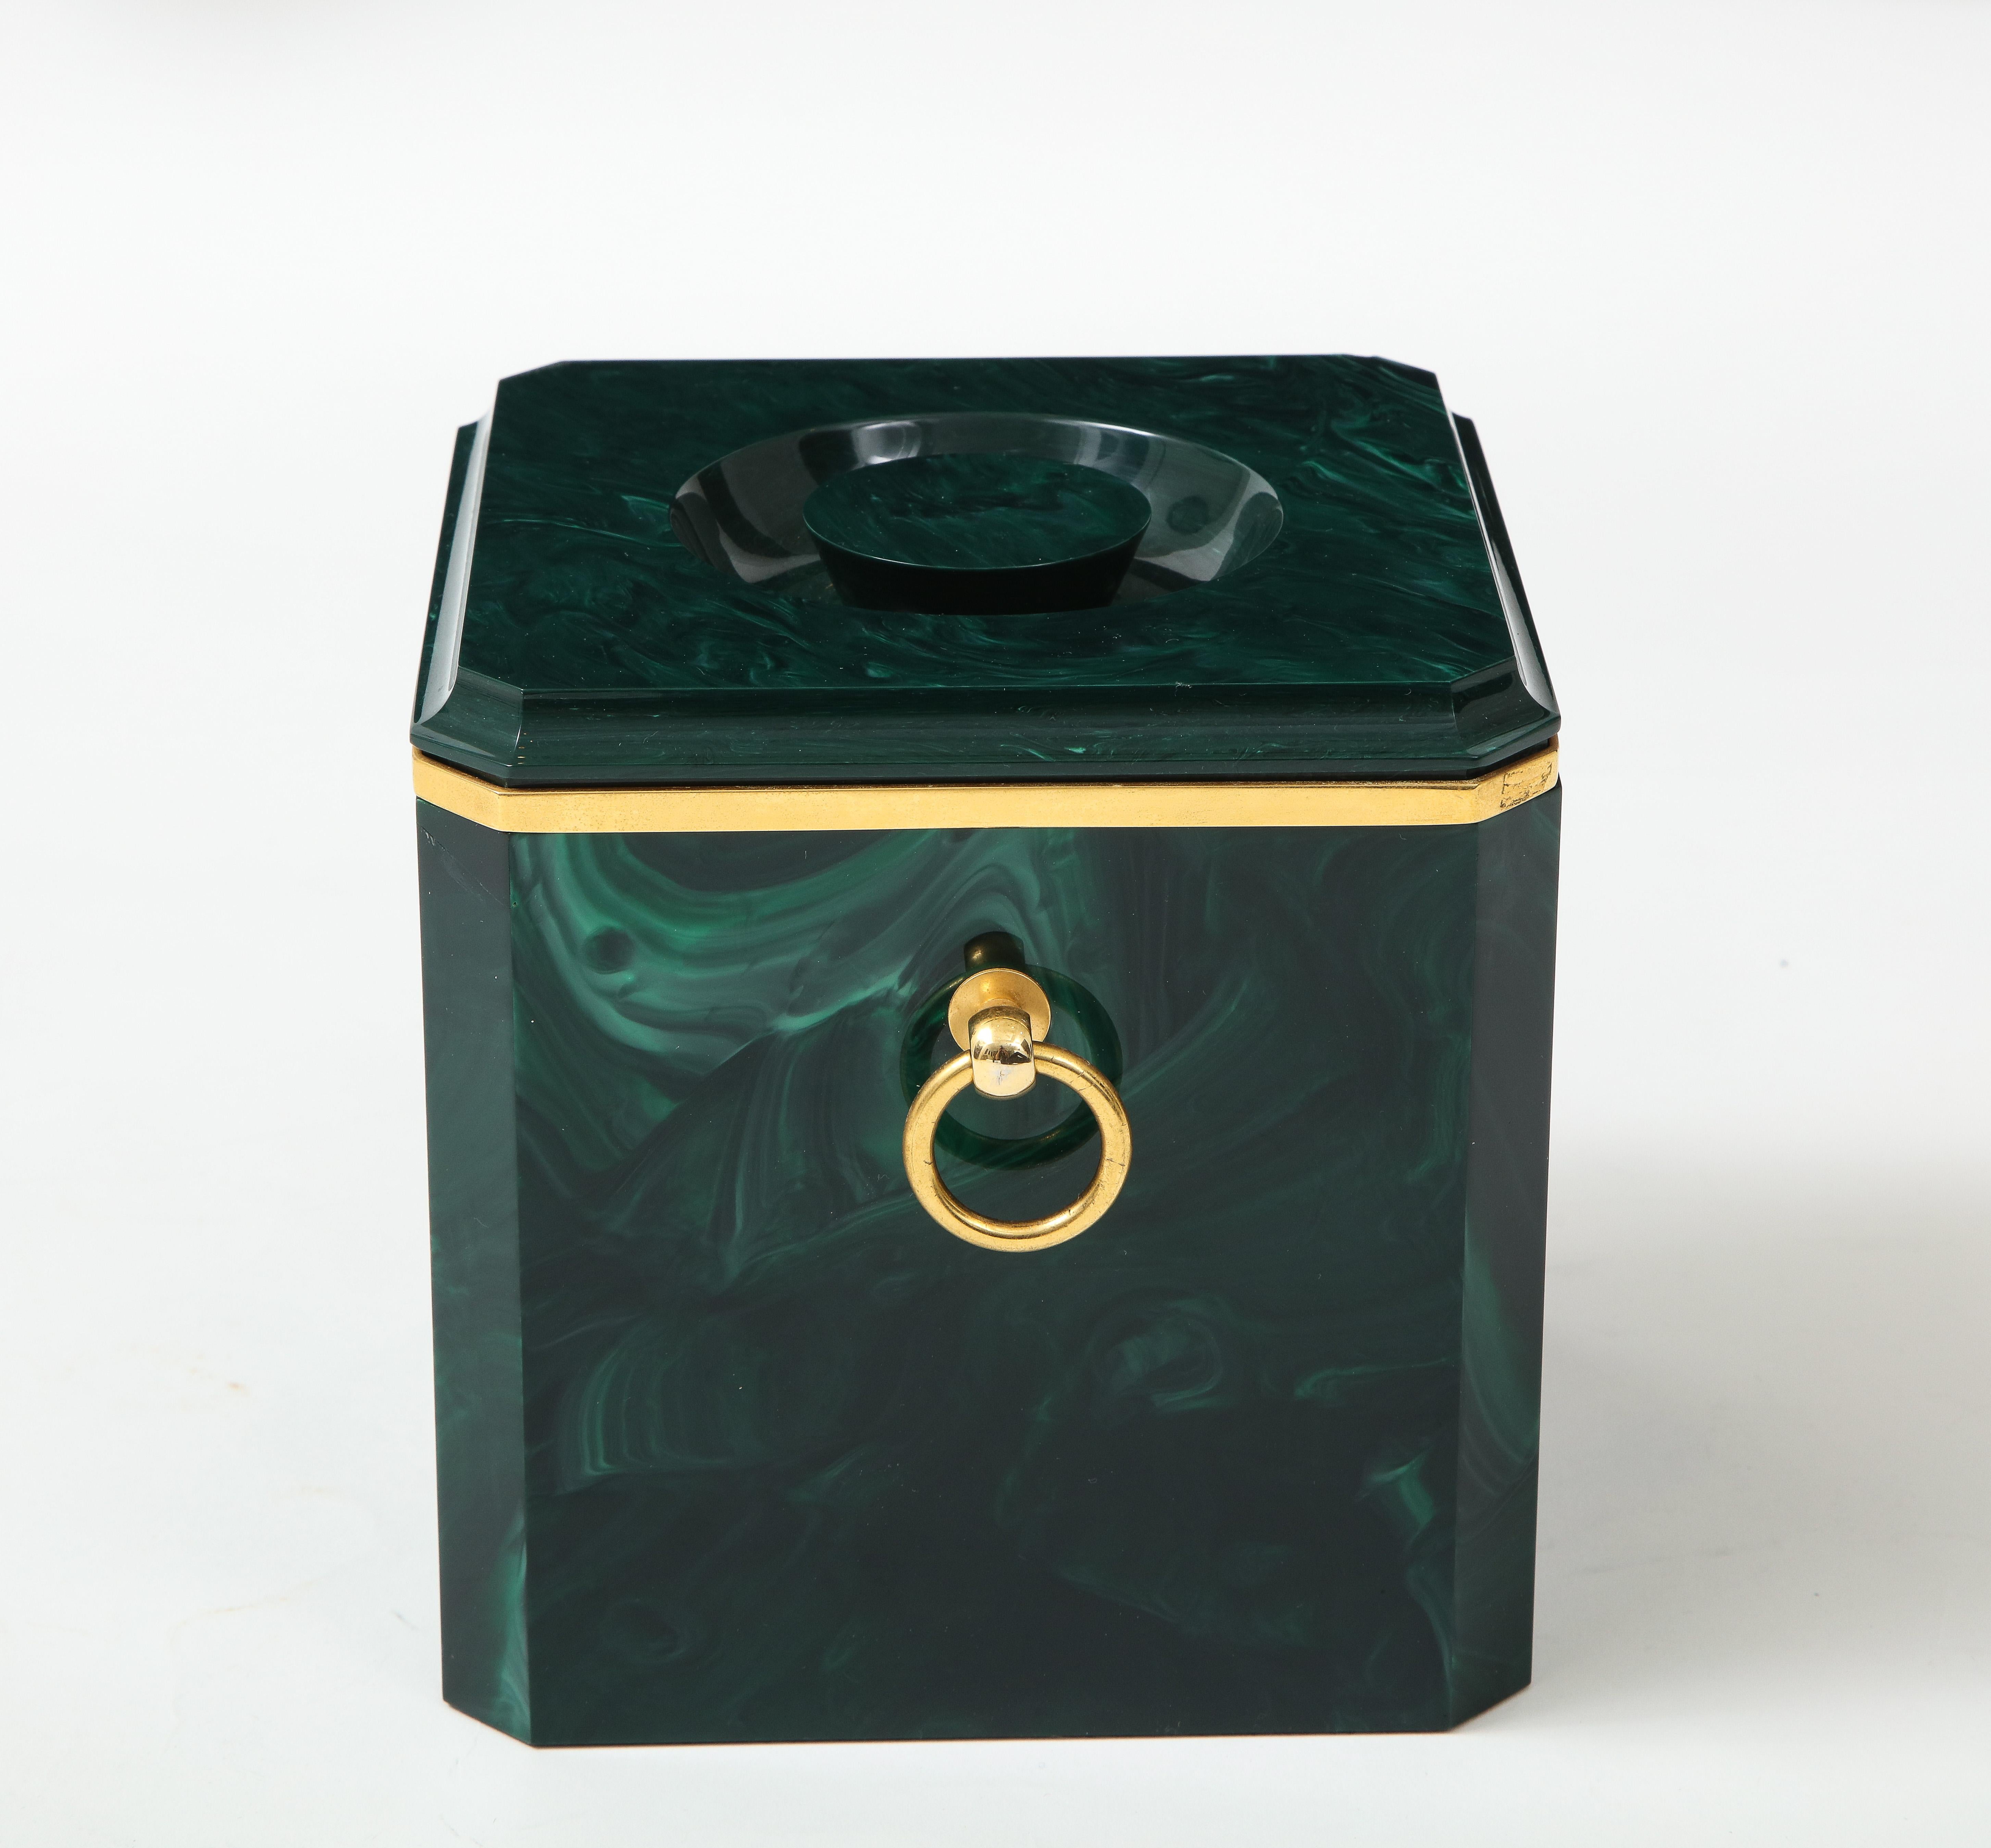 Aldo Tura Faux Malachite Ice Bucket with Brass Rings, Italy, 1970s In Good Condition For Sale In New York, NY